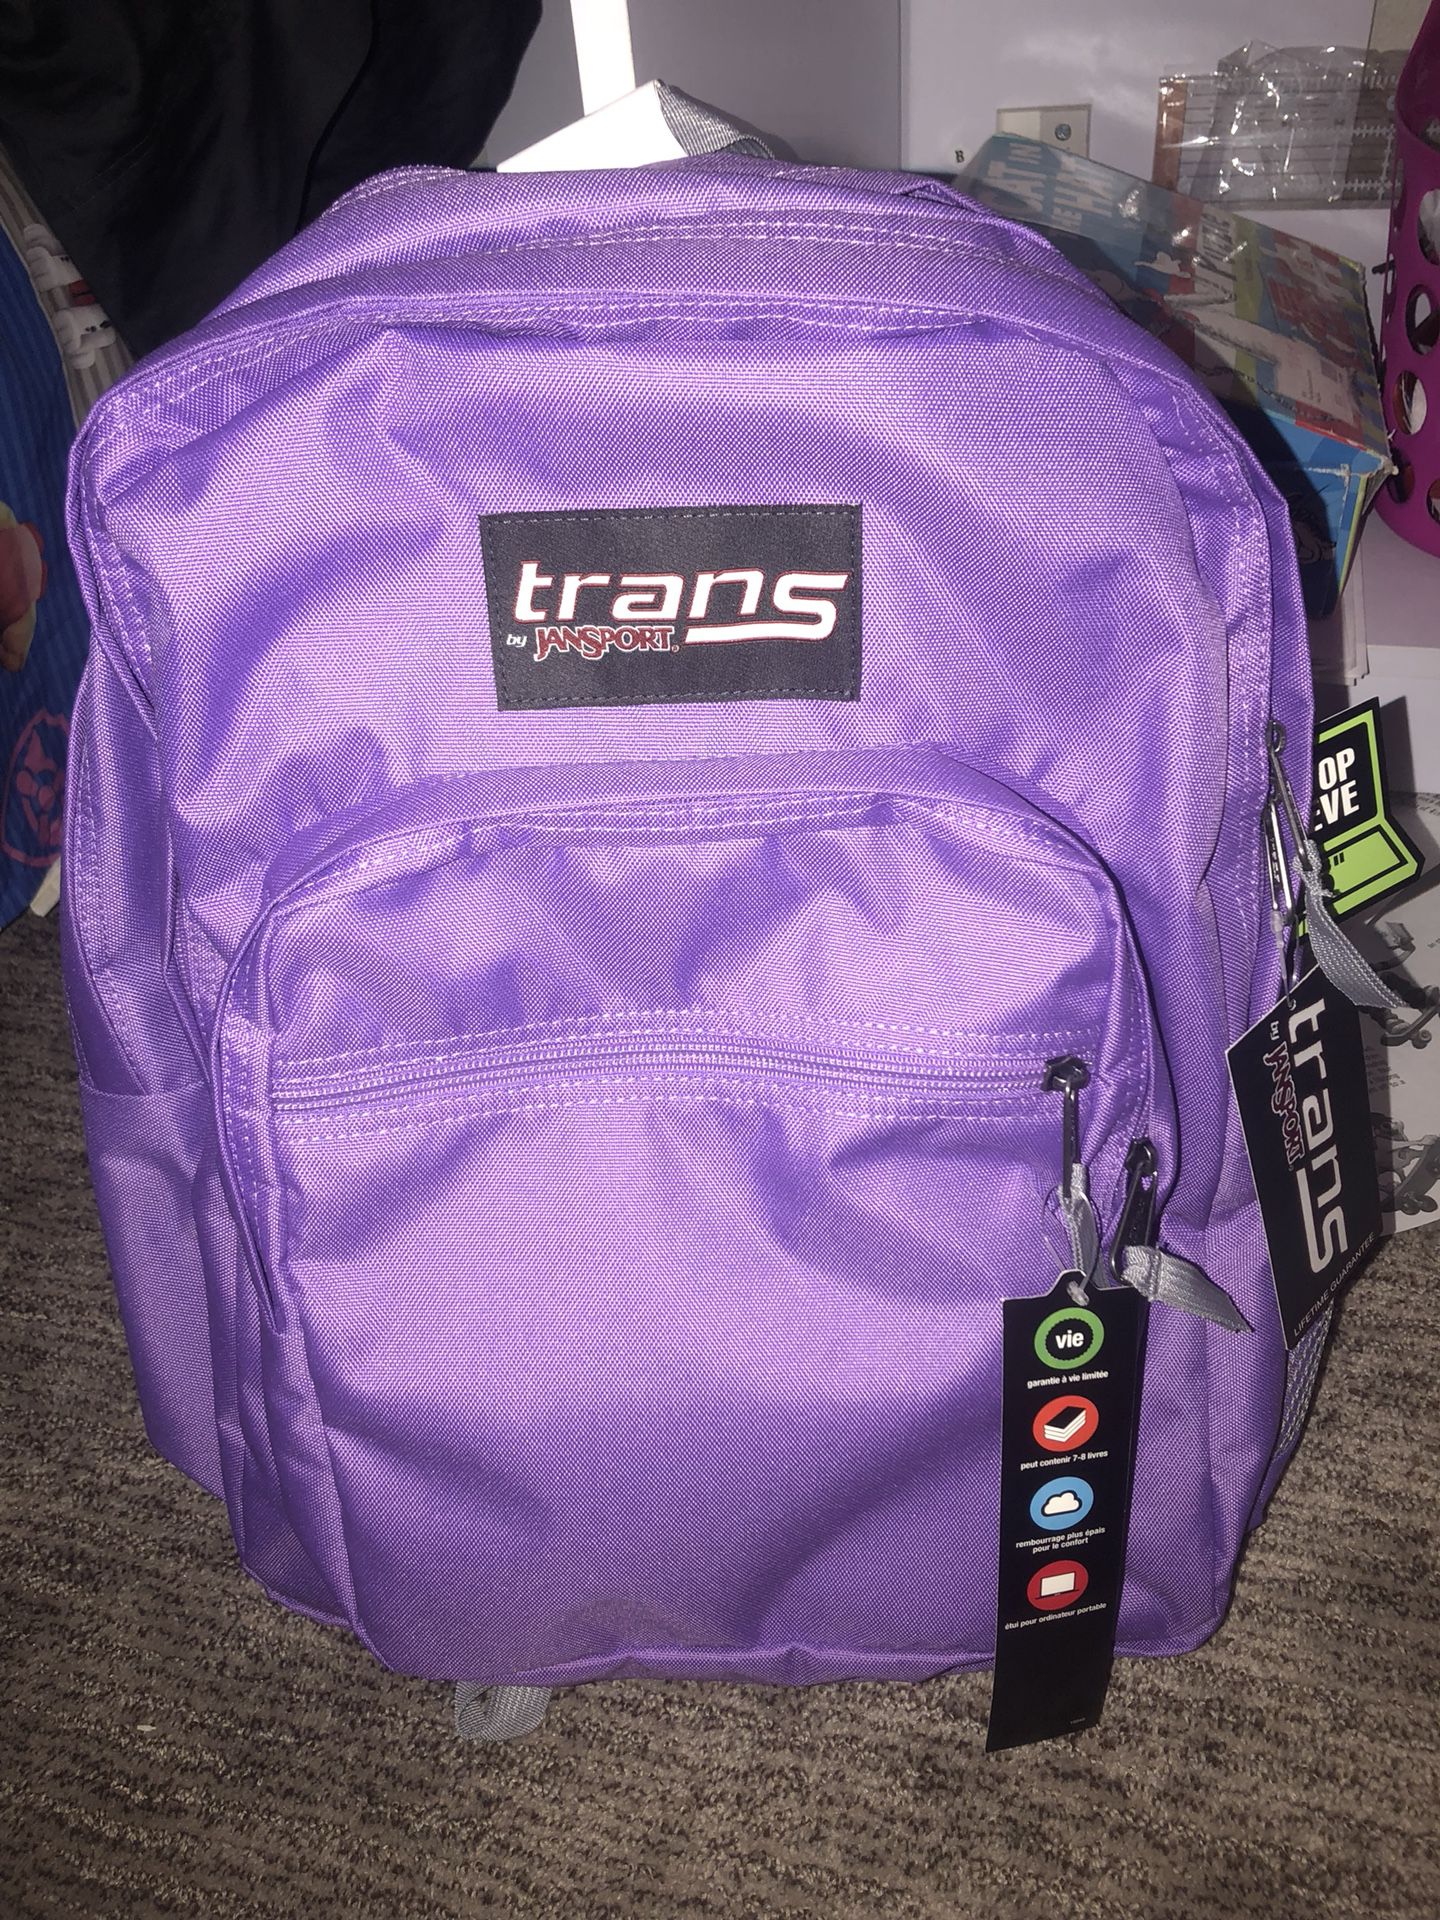 Trans by Jansport BackPack